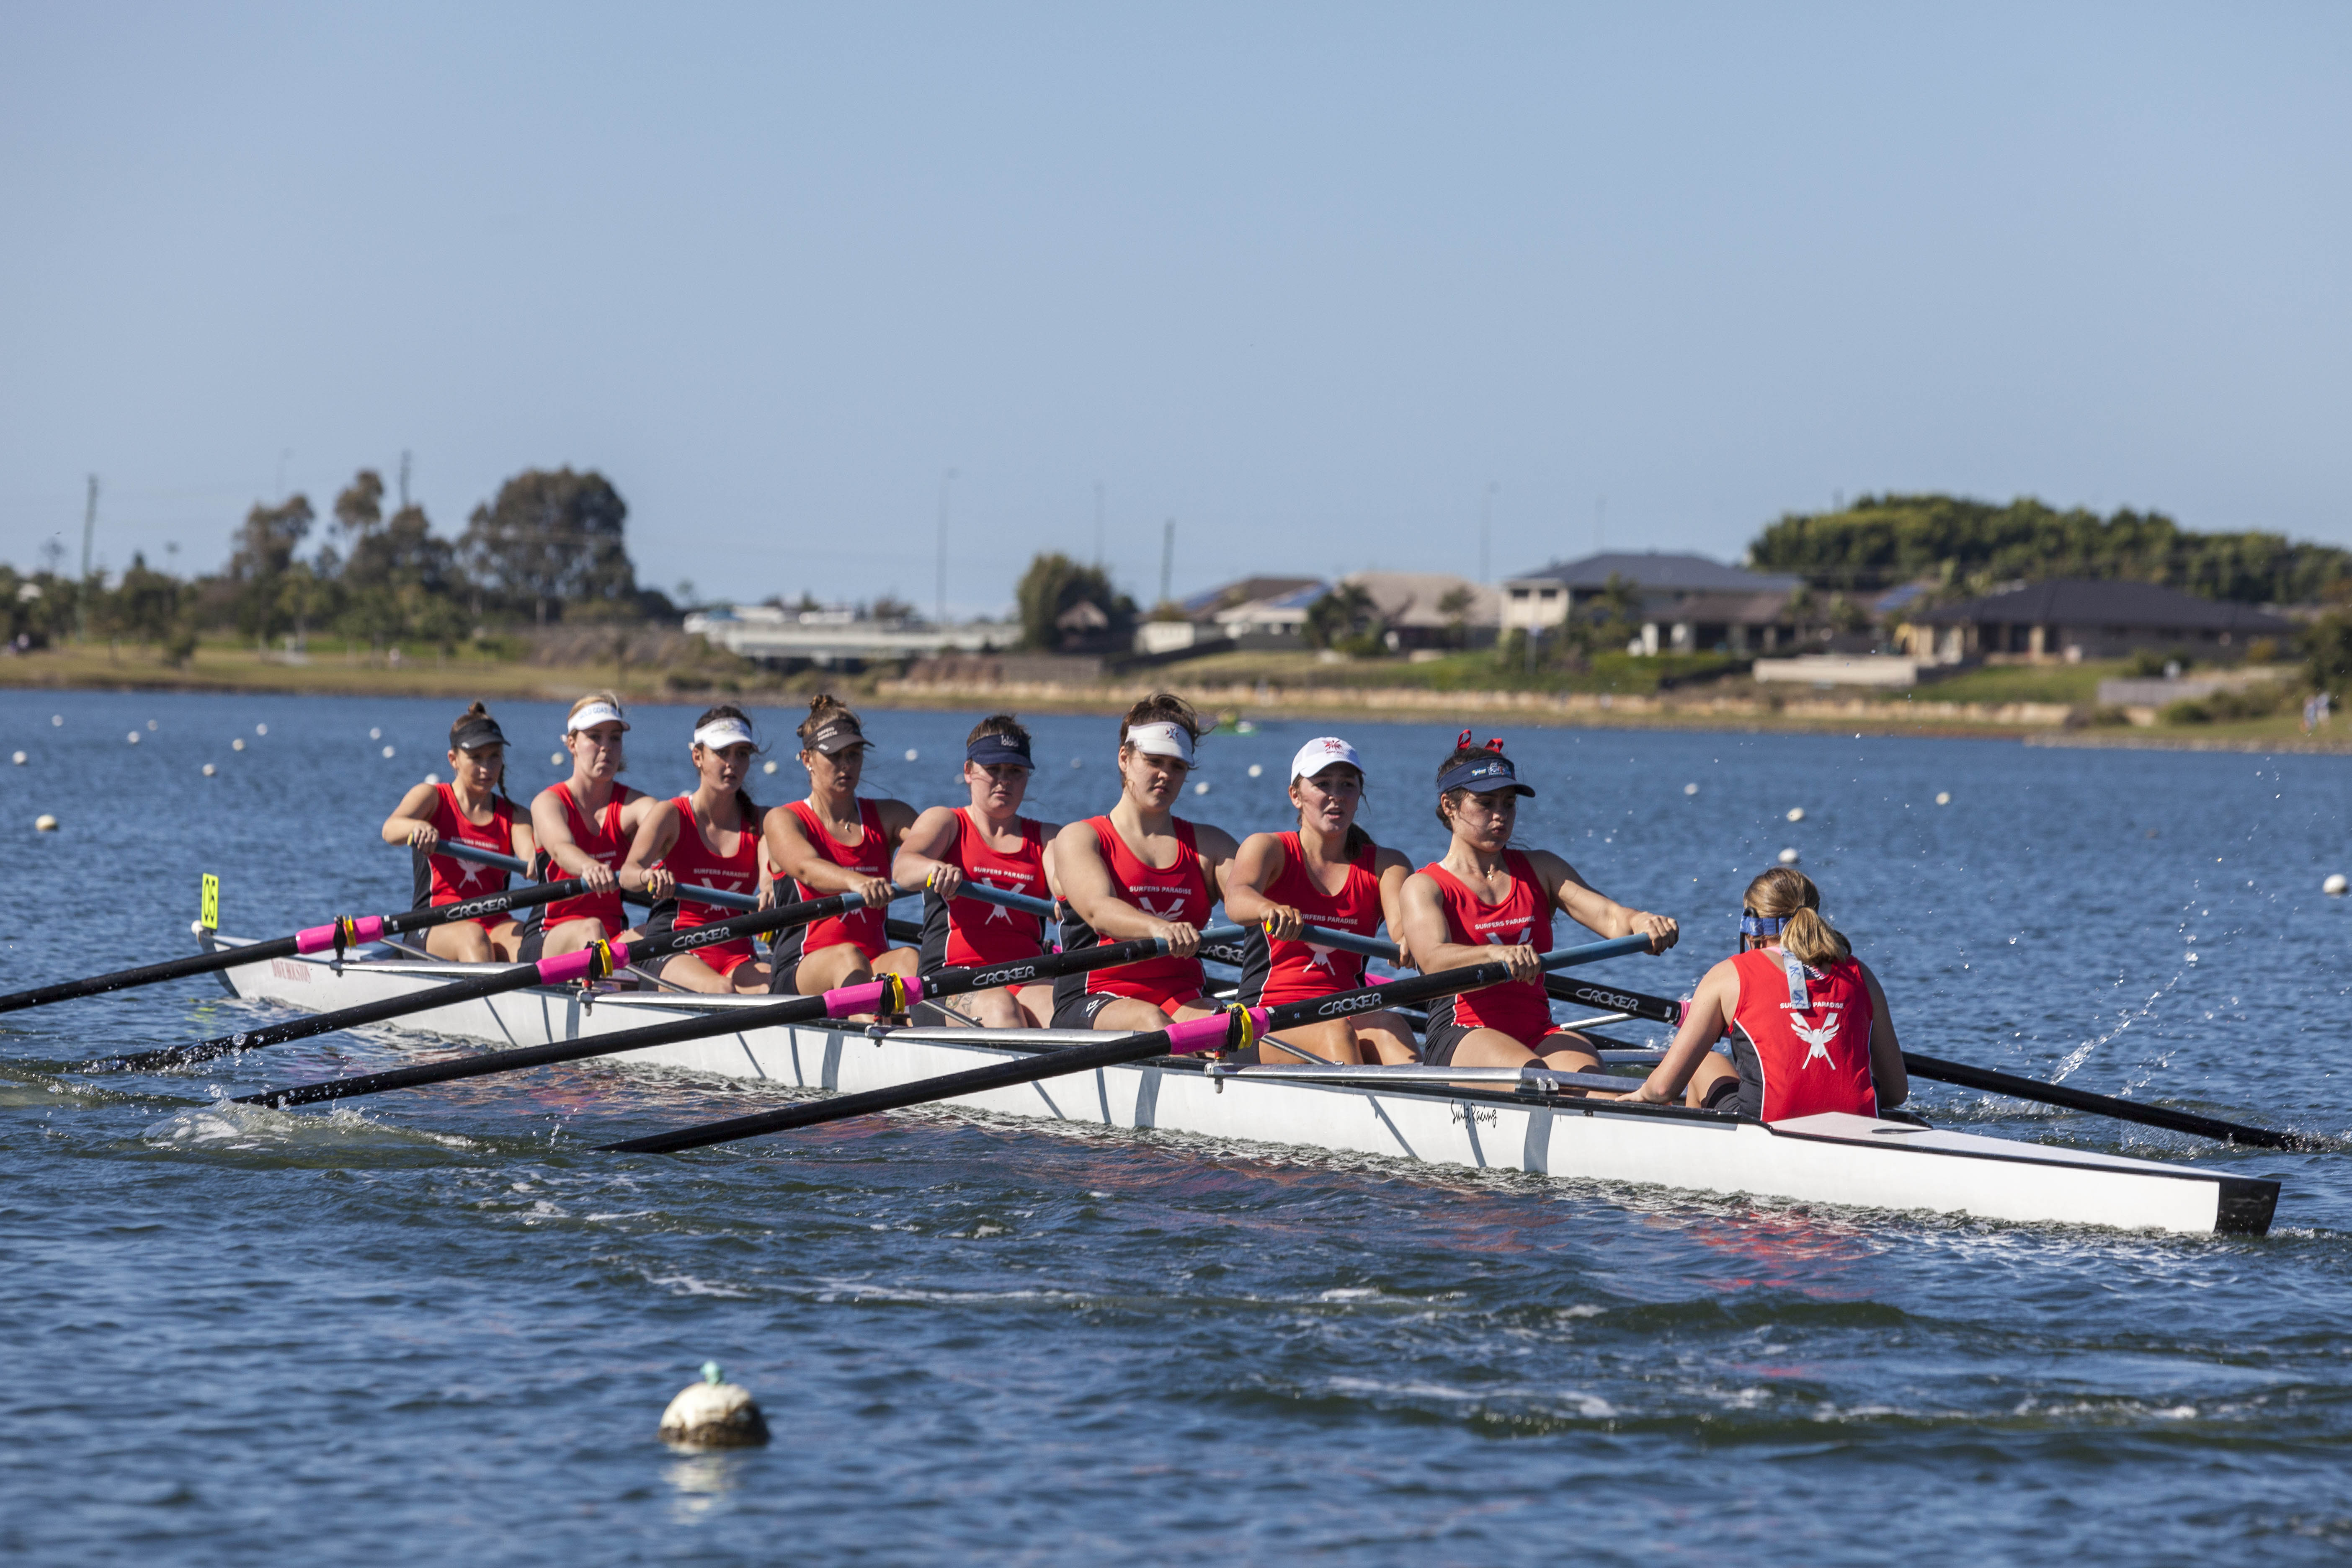 Action on the water during the 2015 University Challenge and Griffith Regatta